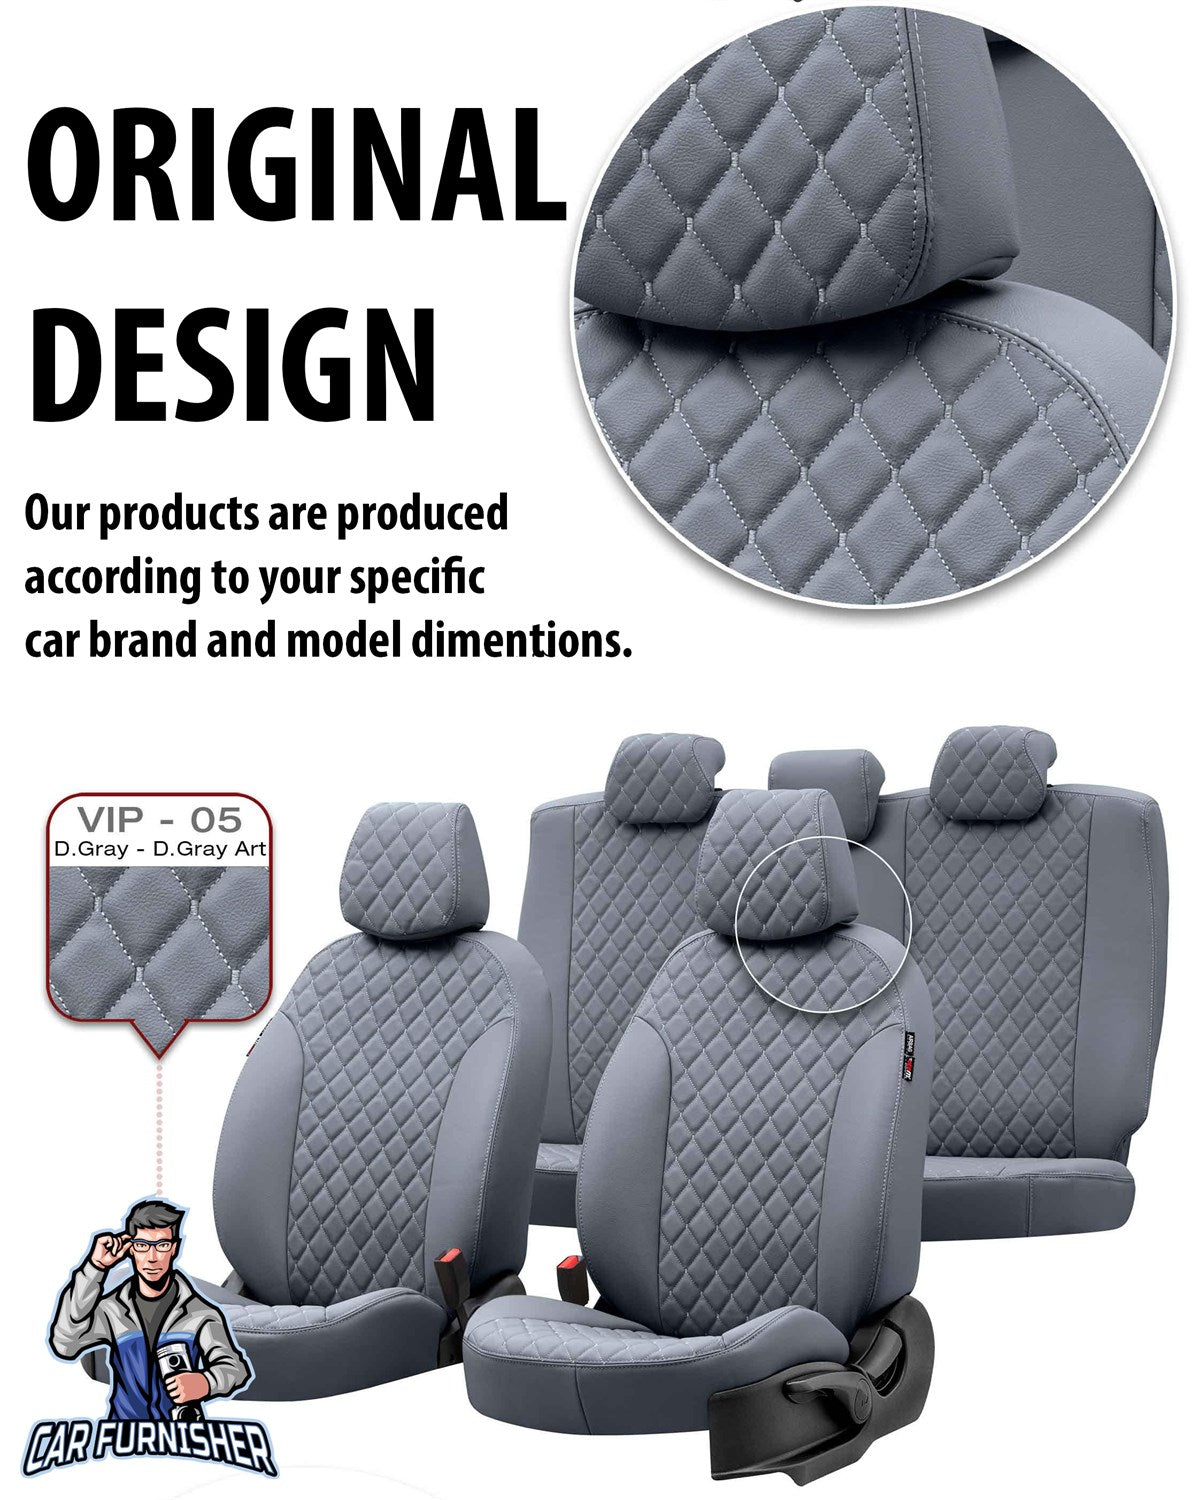 Seat Cordoba Seat Covers Madrid Leather Design Smoked Leather